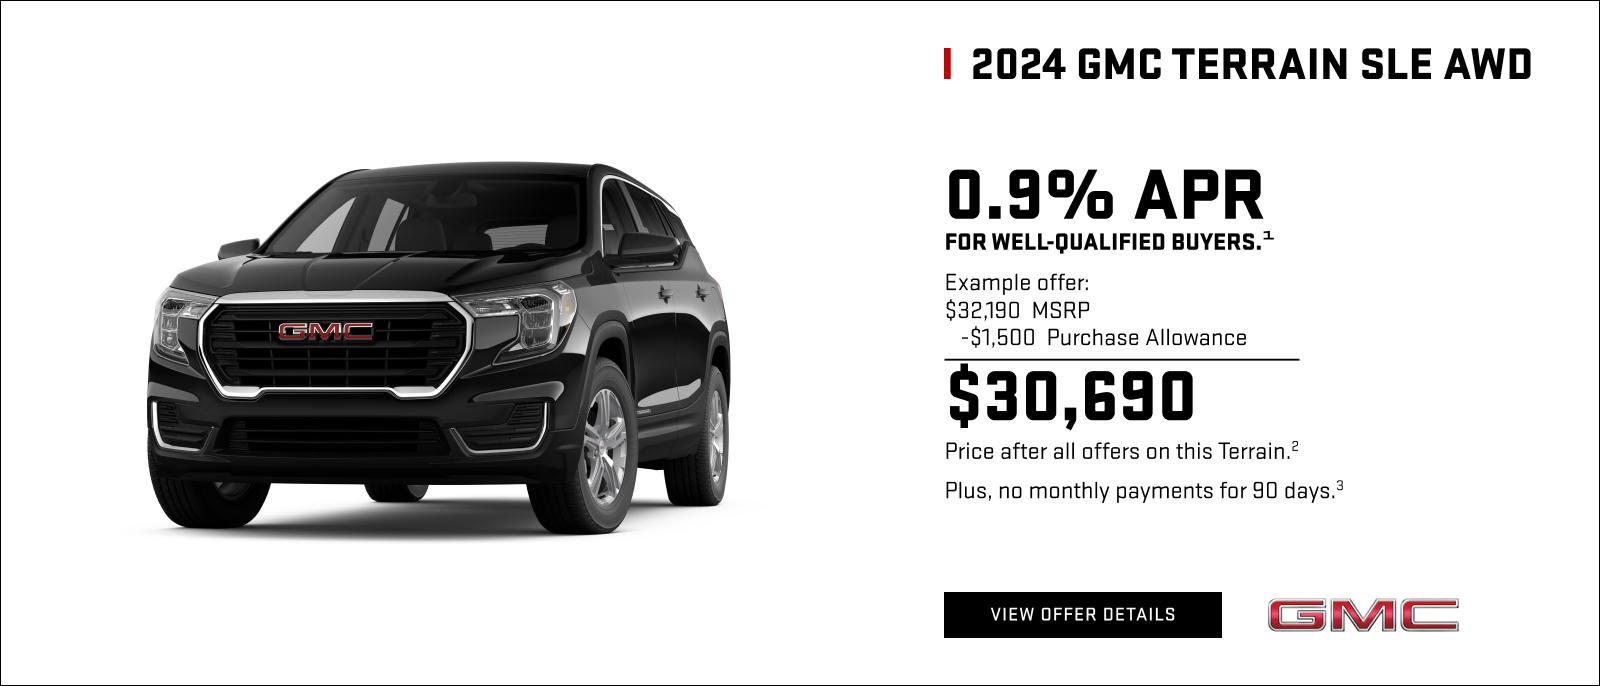 0.9% APR for well-qualified buyers.1

Example offer:
$32,190 MSRP
$1,500 Purchase Allowance
$30,690 Price after all offers on this Terrain.2

Plus, no monthly payments for 90 days. 3